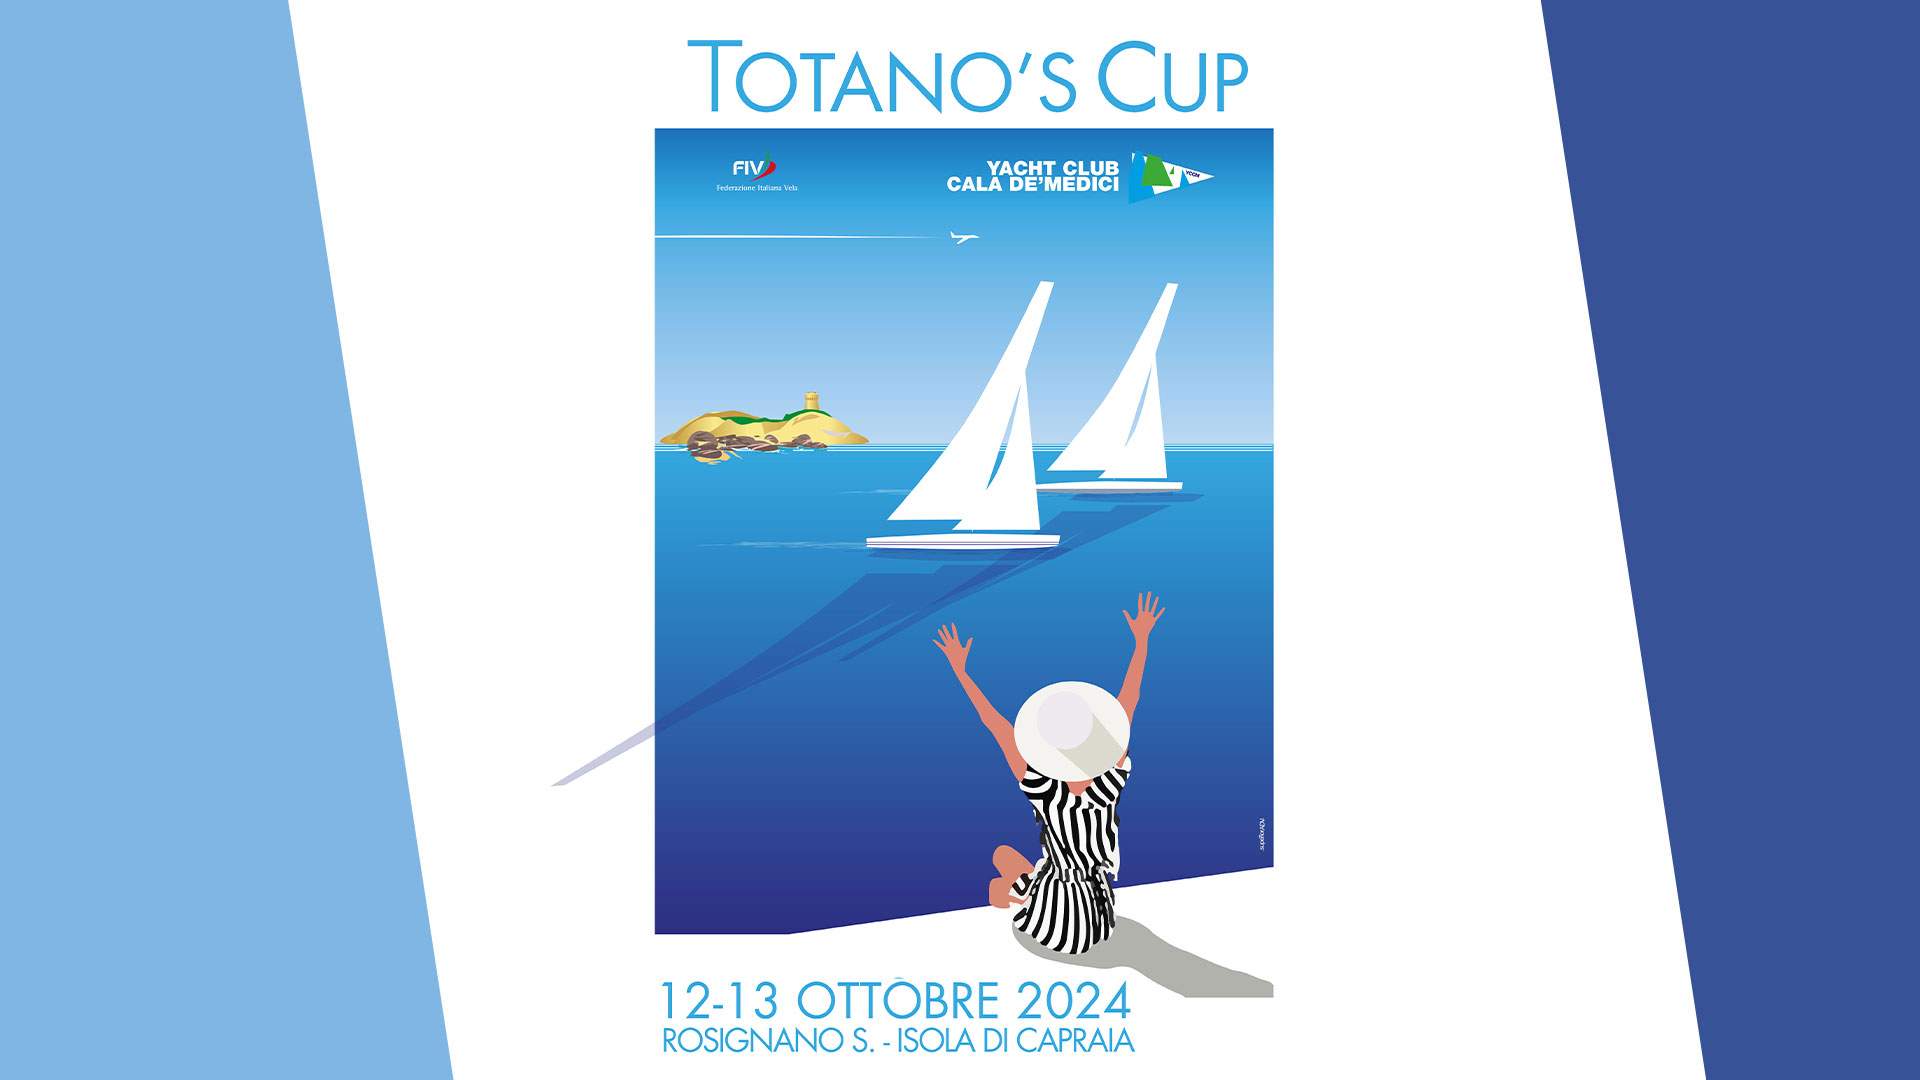 Totano's Cup 2024